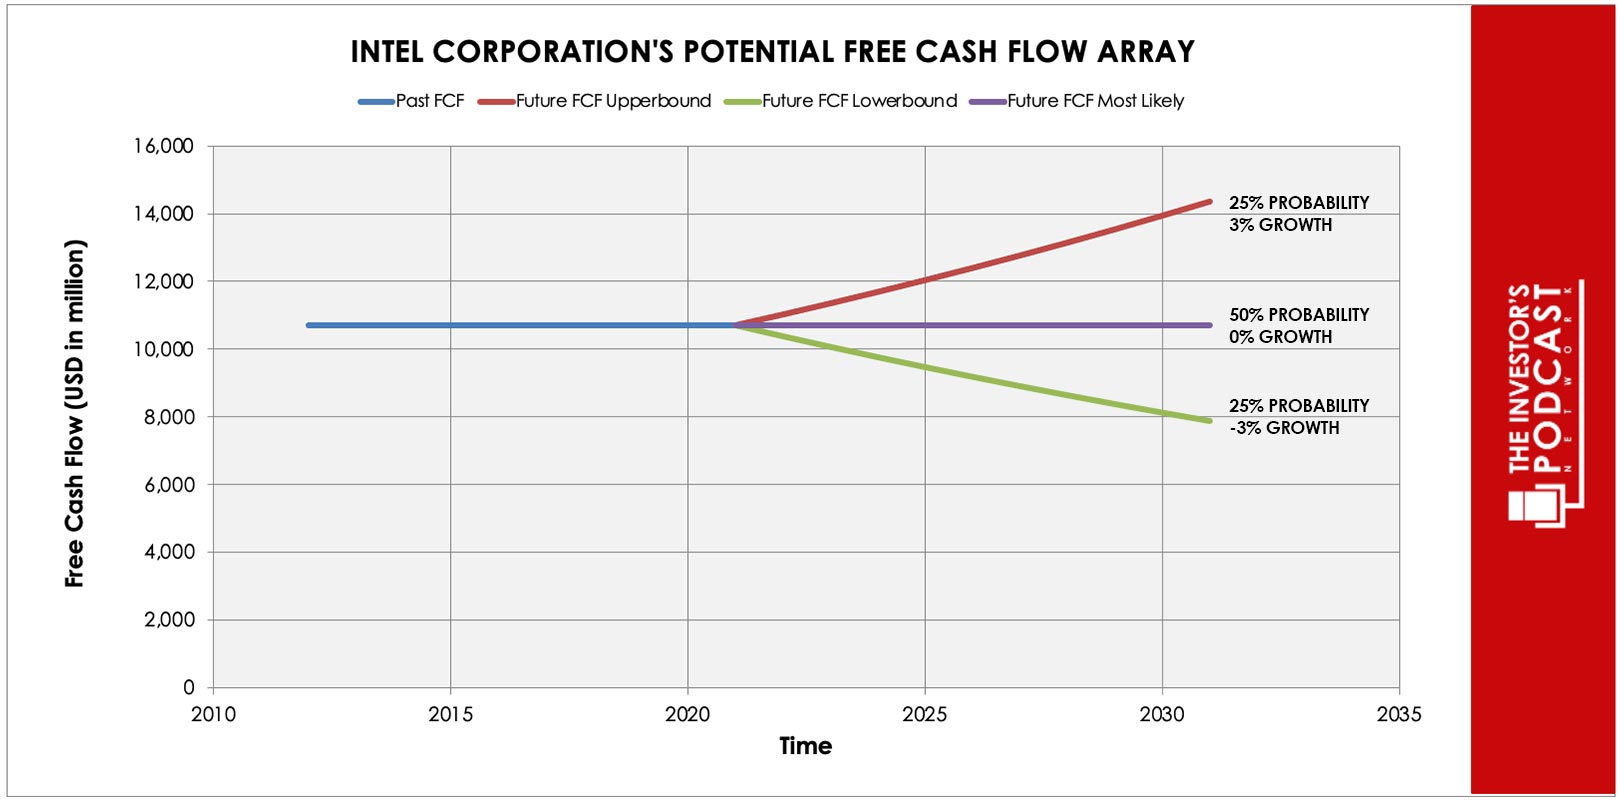 intc-iva-potential-free-cash-flow-array